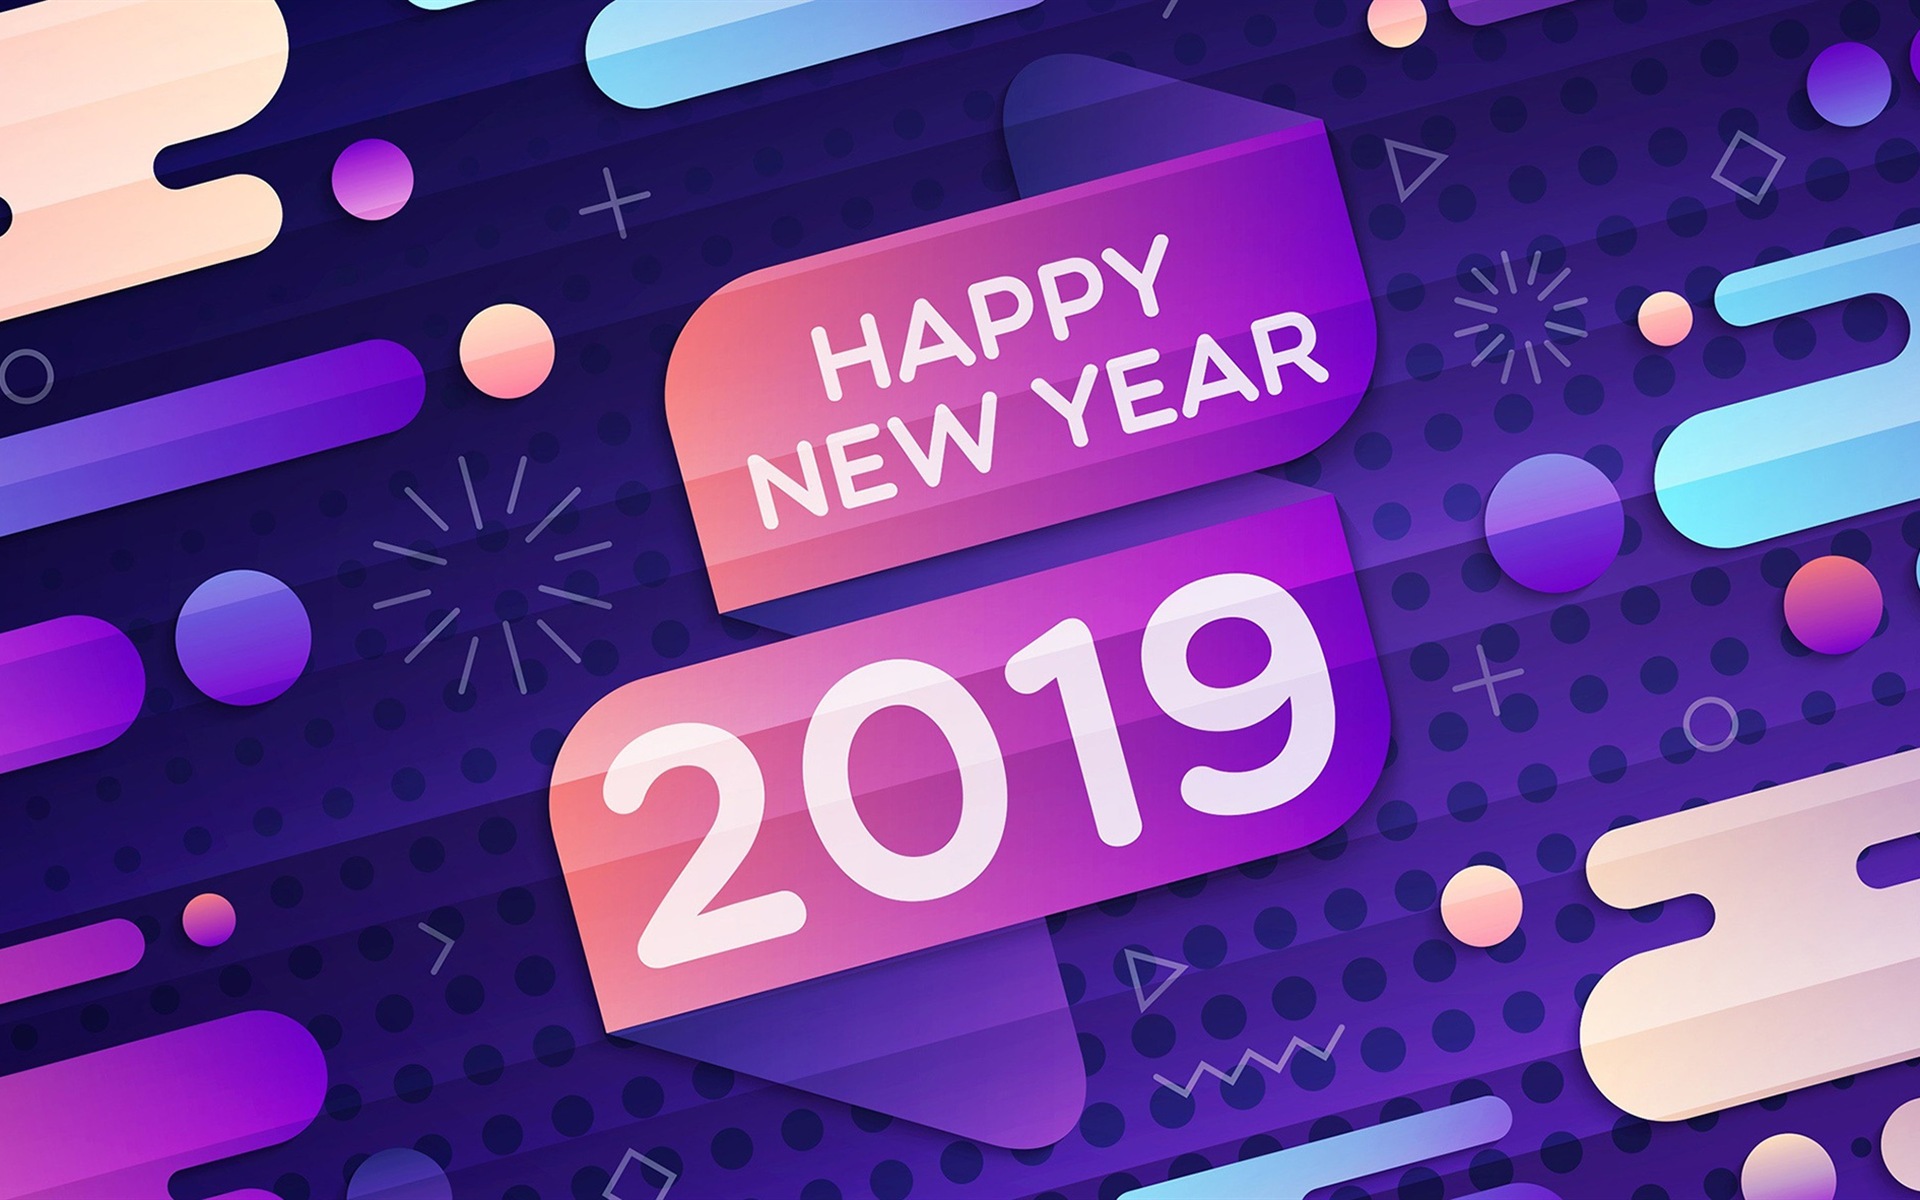 Happy New Year 2019 HD wallpapers #10 - 1920x1200